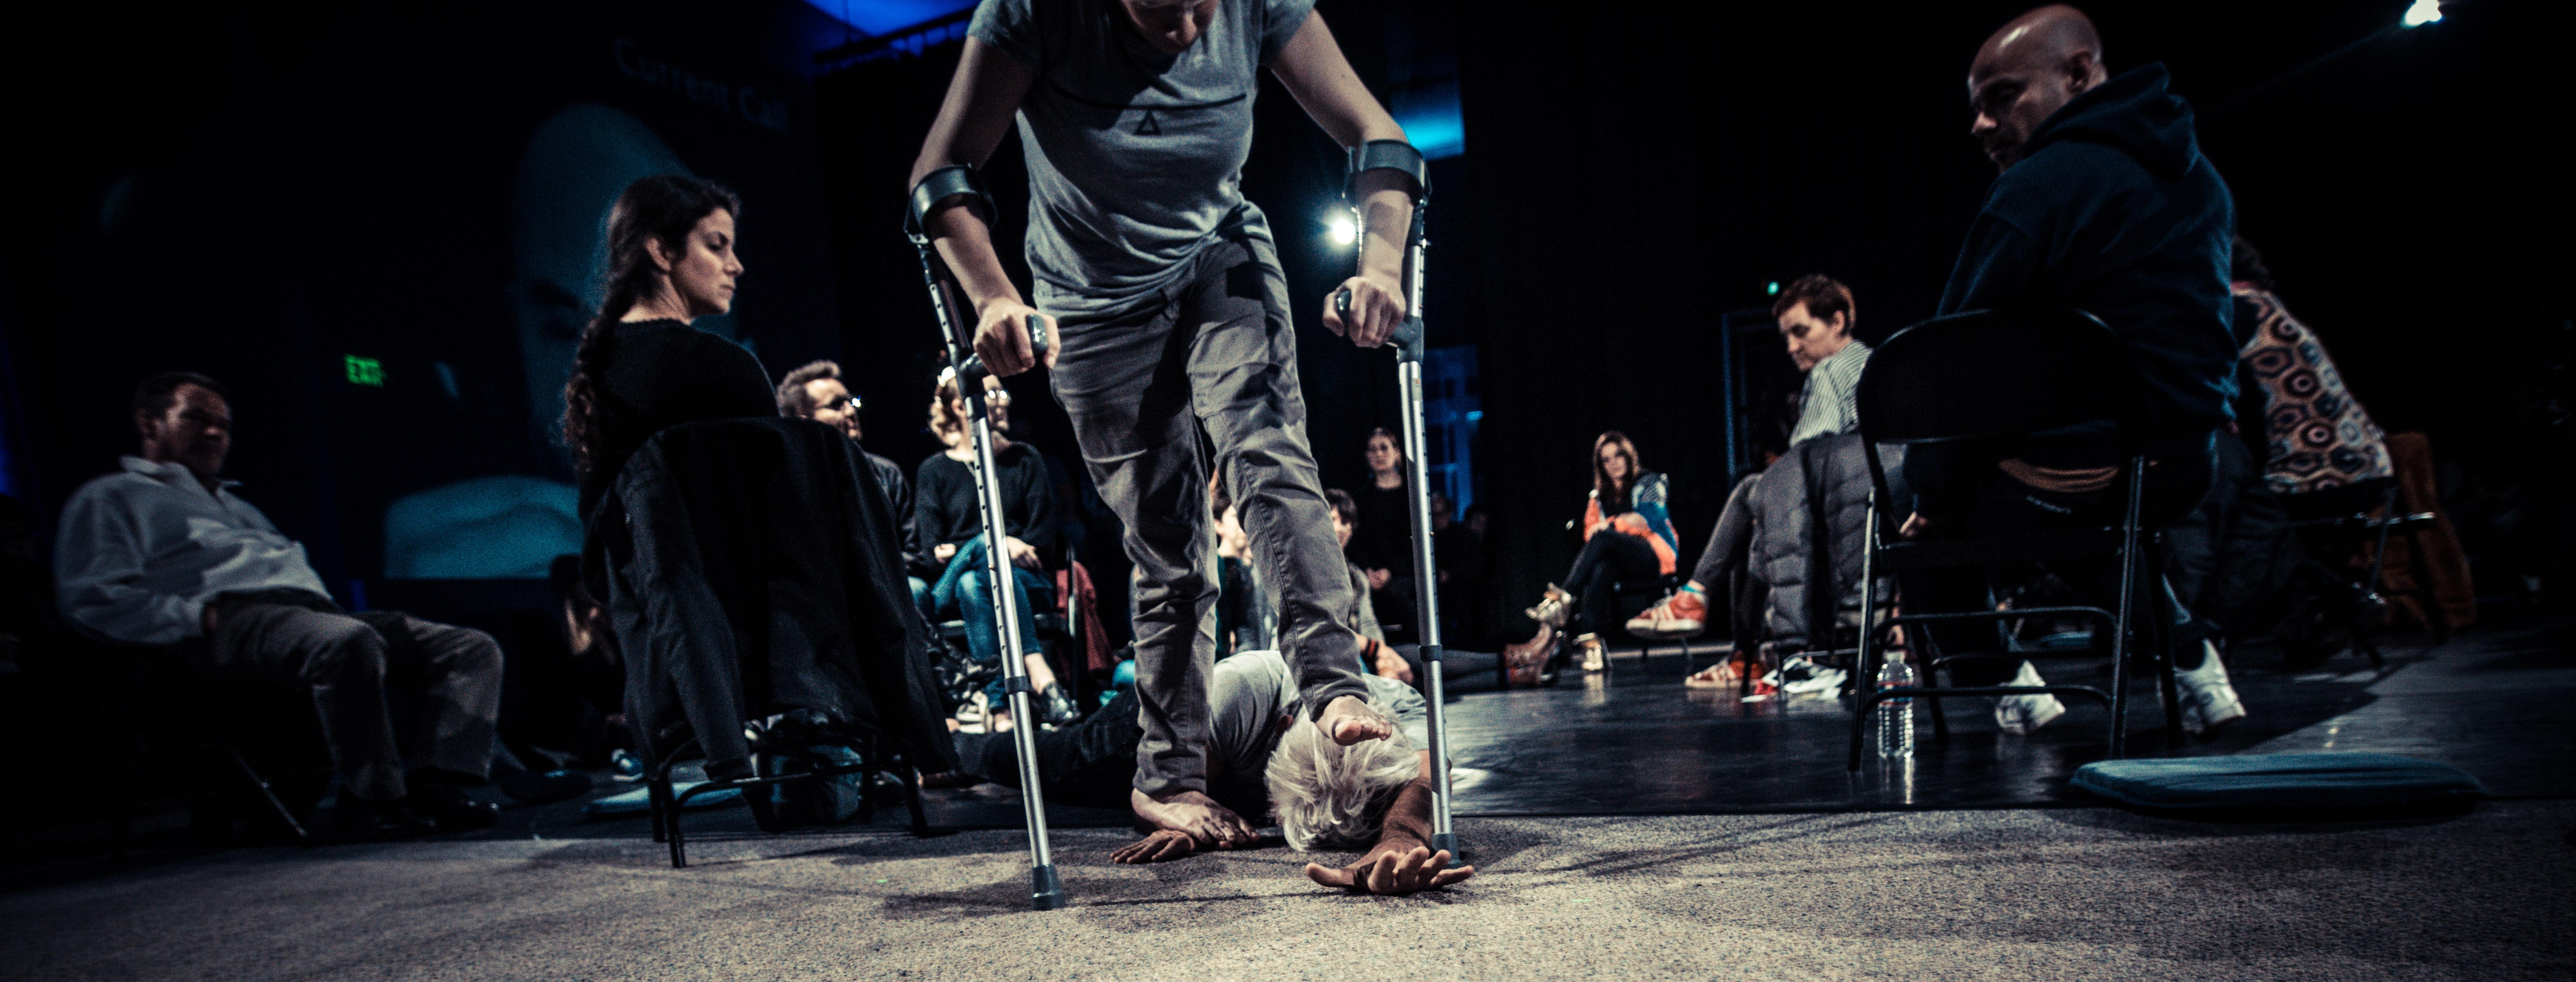 Seated people on a darkened stage watch as a woman using crutches steps on and walks over a man, who lies on the ground.